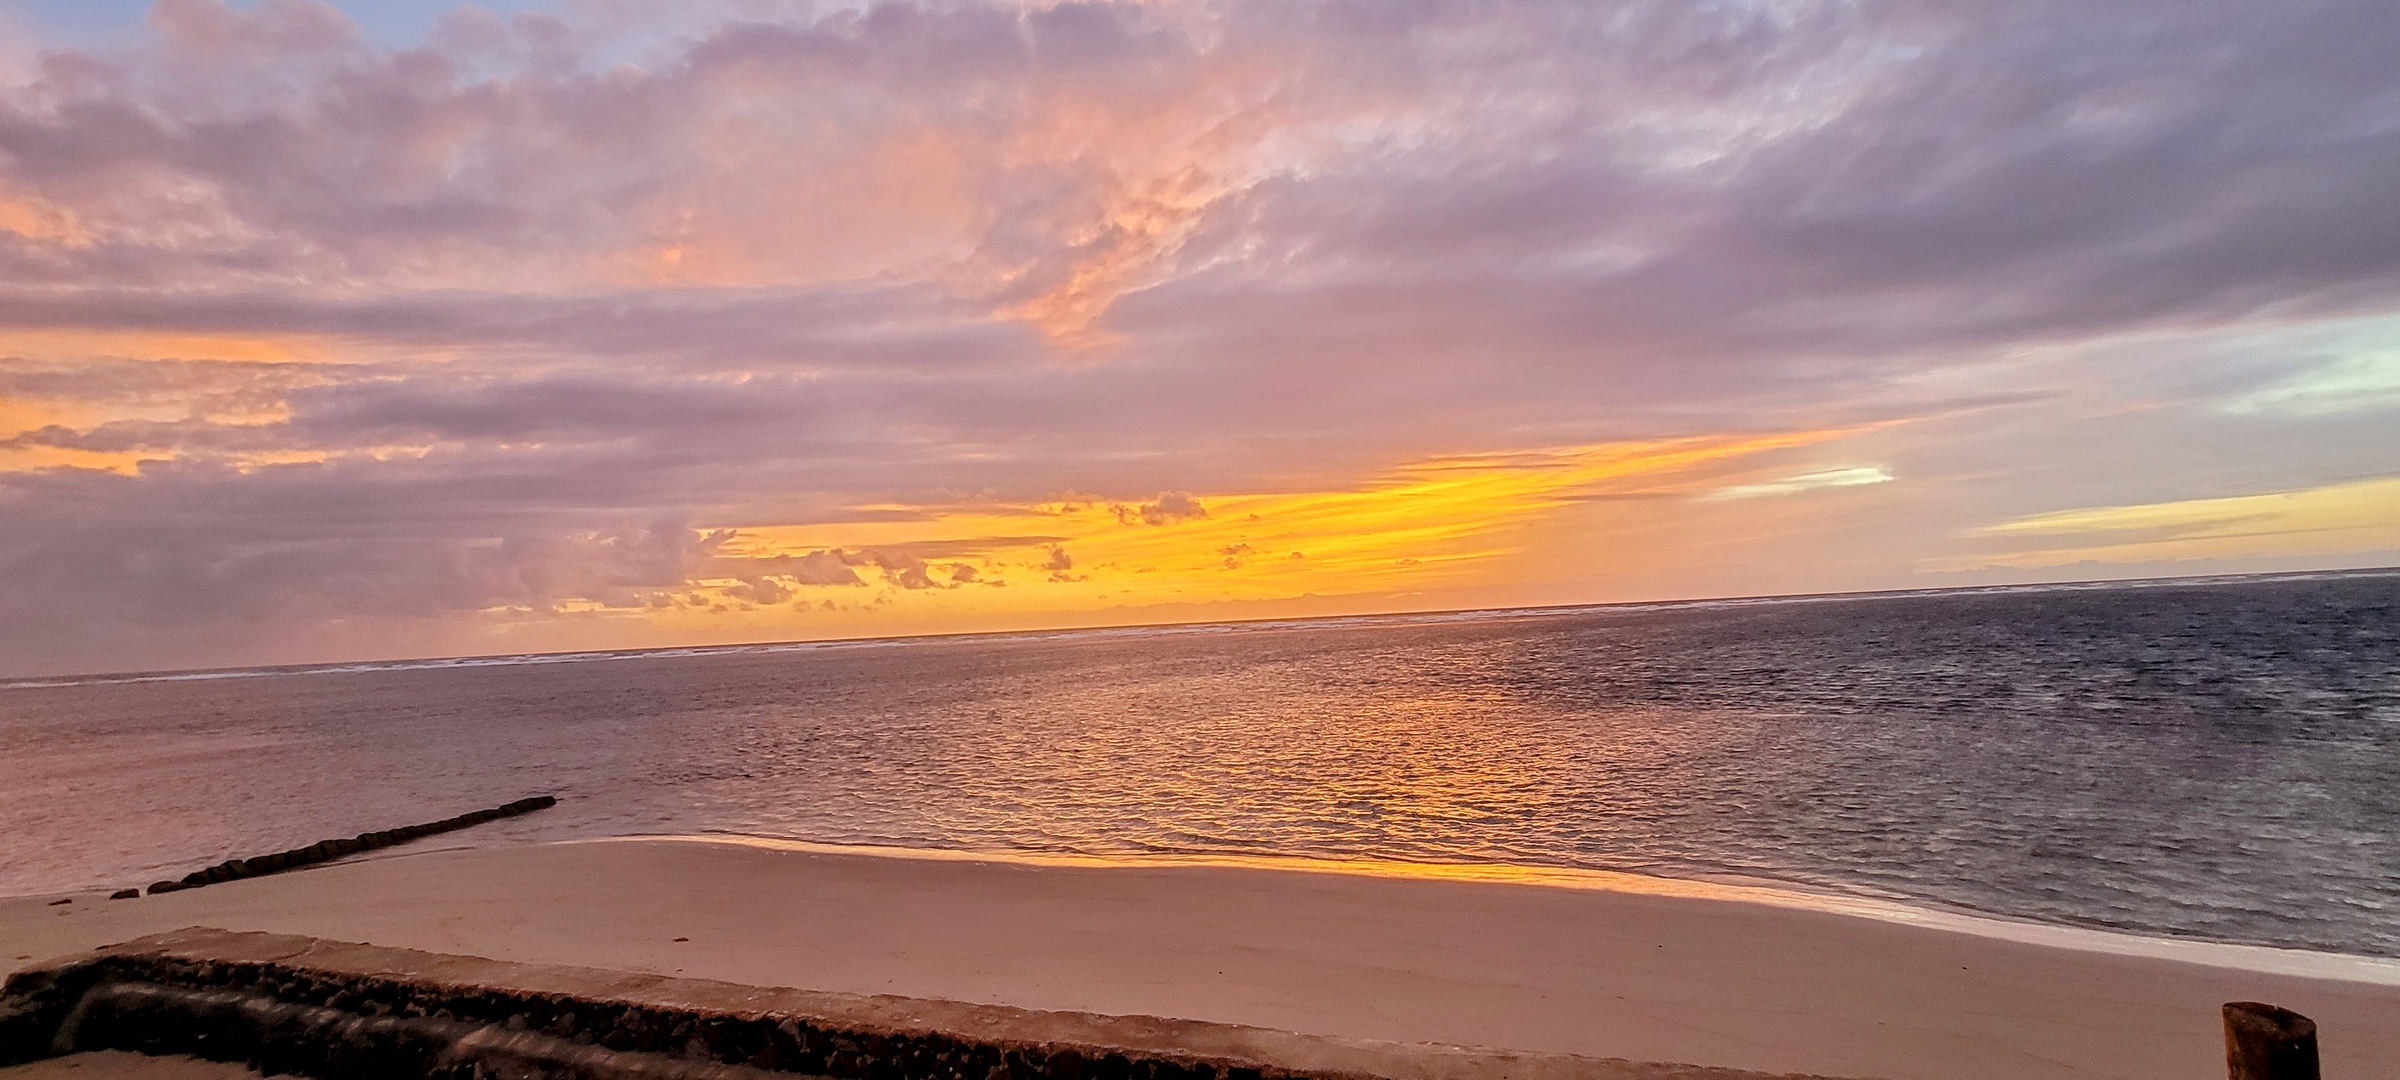 Hauula Vacation Rentals, Paradise Reef Retreat - Break of Dawn at Home's Private Beach